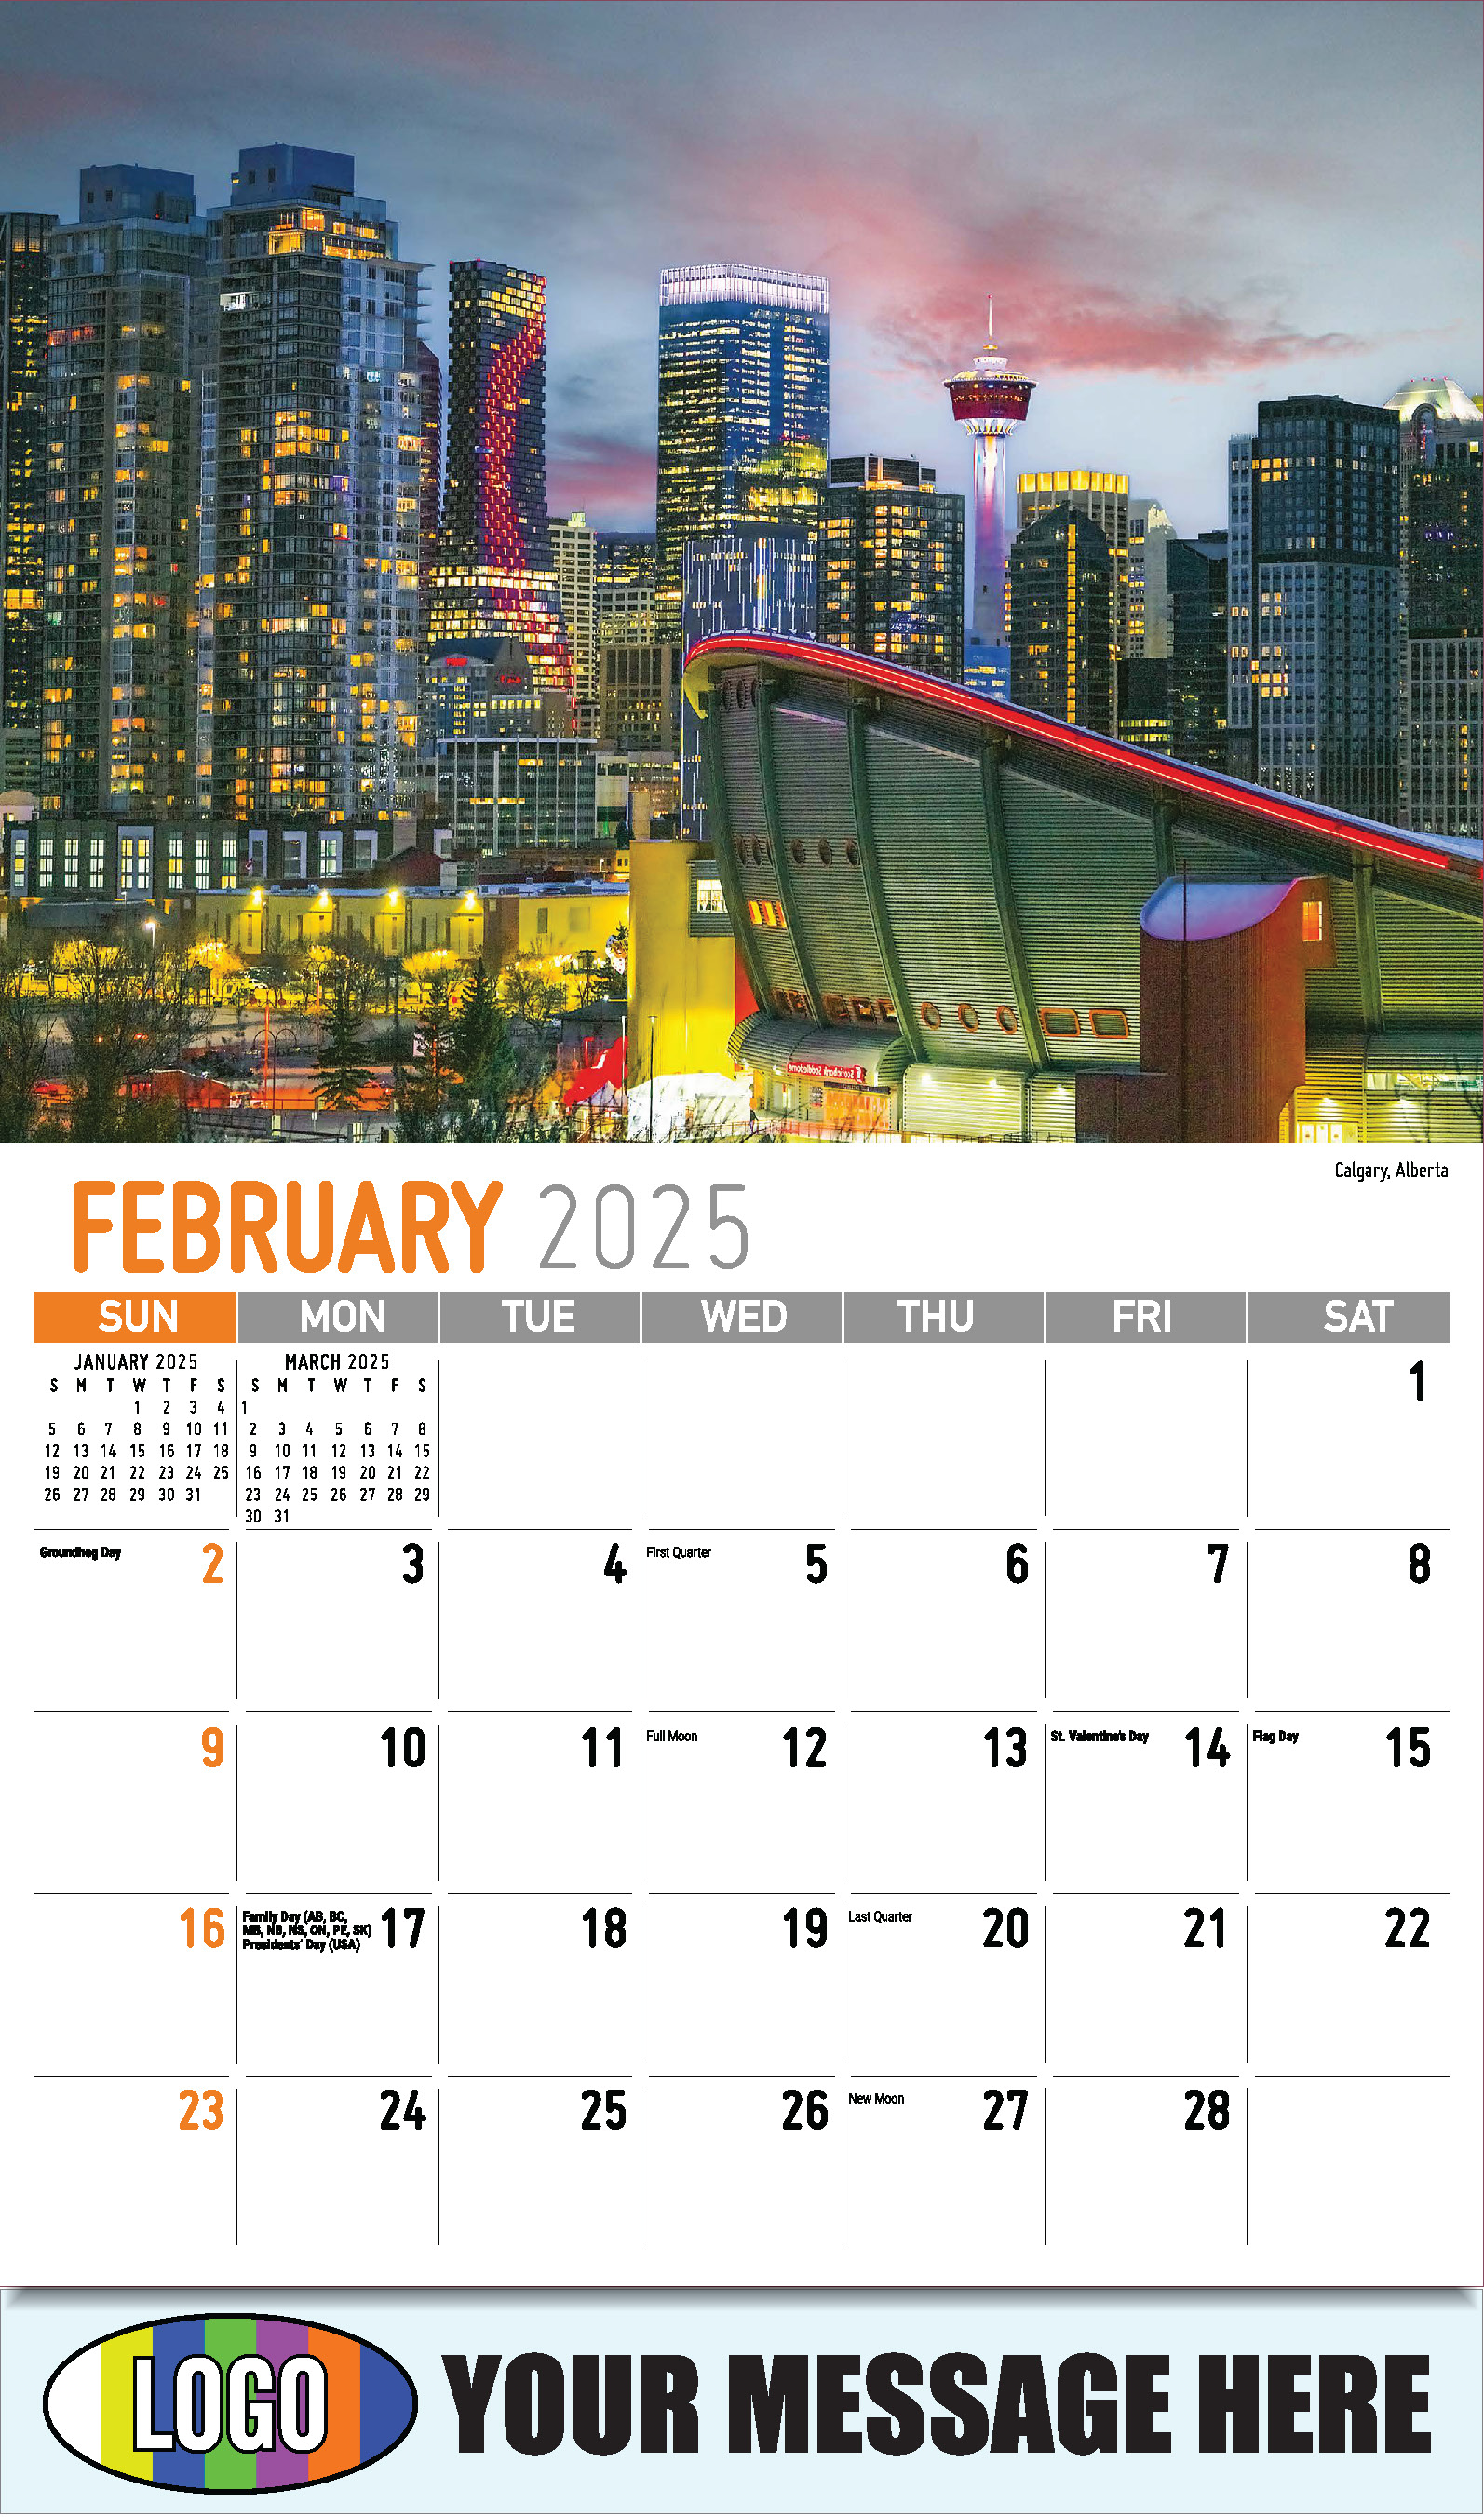 Scenes of Western Canada 2025 Business Promotional Wall Calendar - February